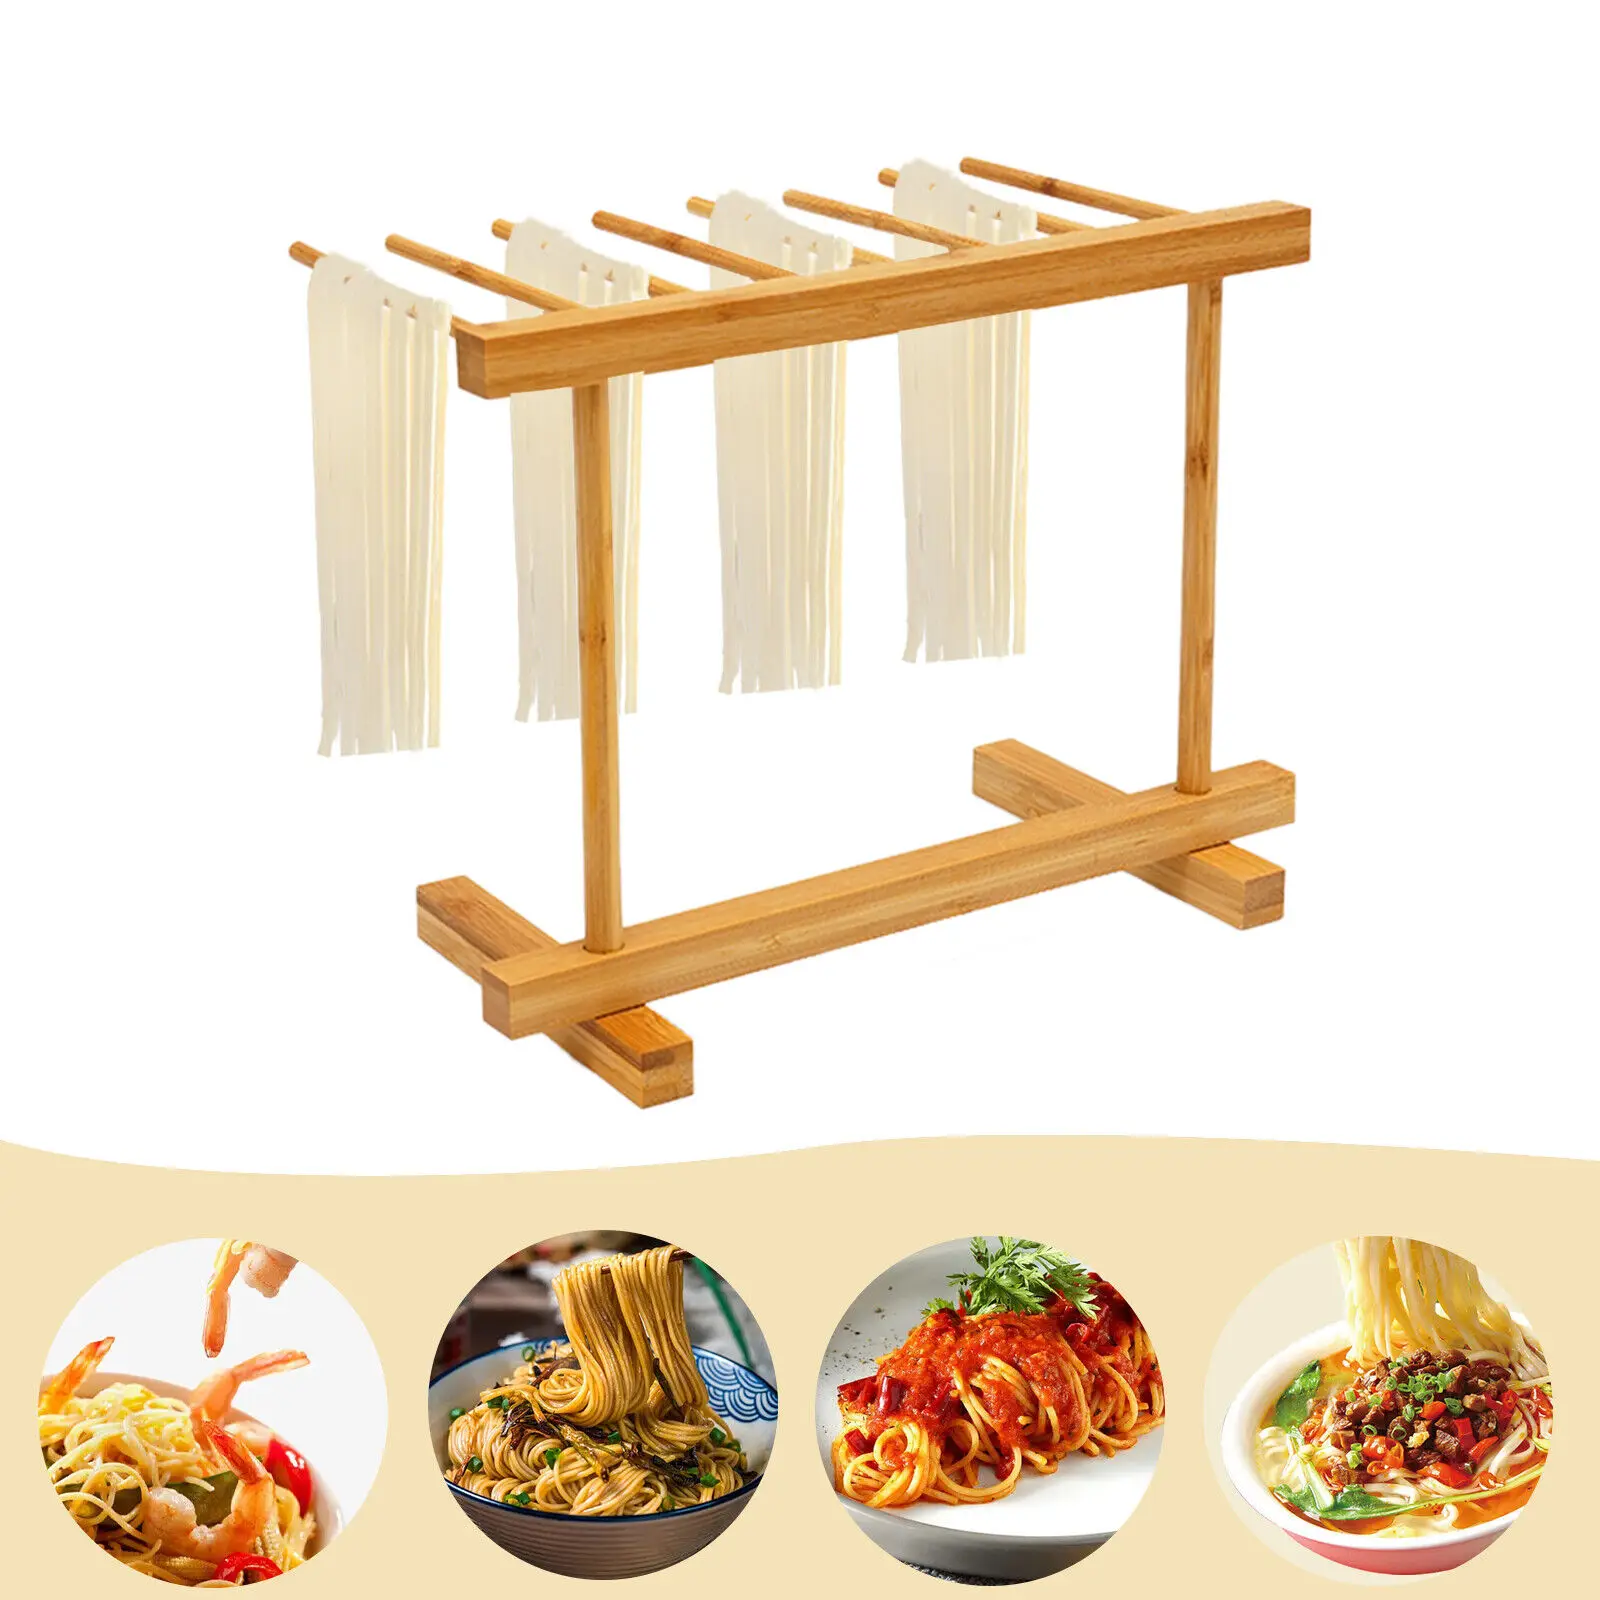 

Pasta Drying Rack, Foldable Spaghetti Noodle Drying Stand for Homemade Noodle, Bamboo Noodle Drying Hold with 8 Suspension Rods